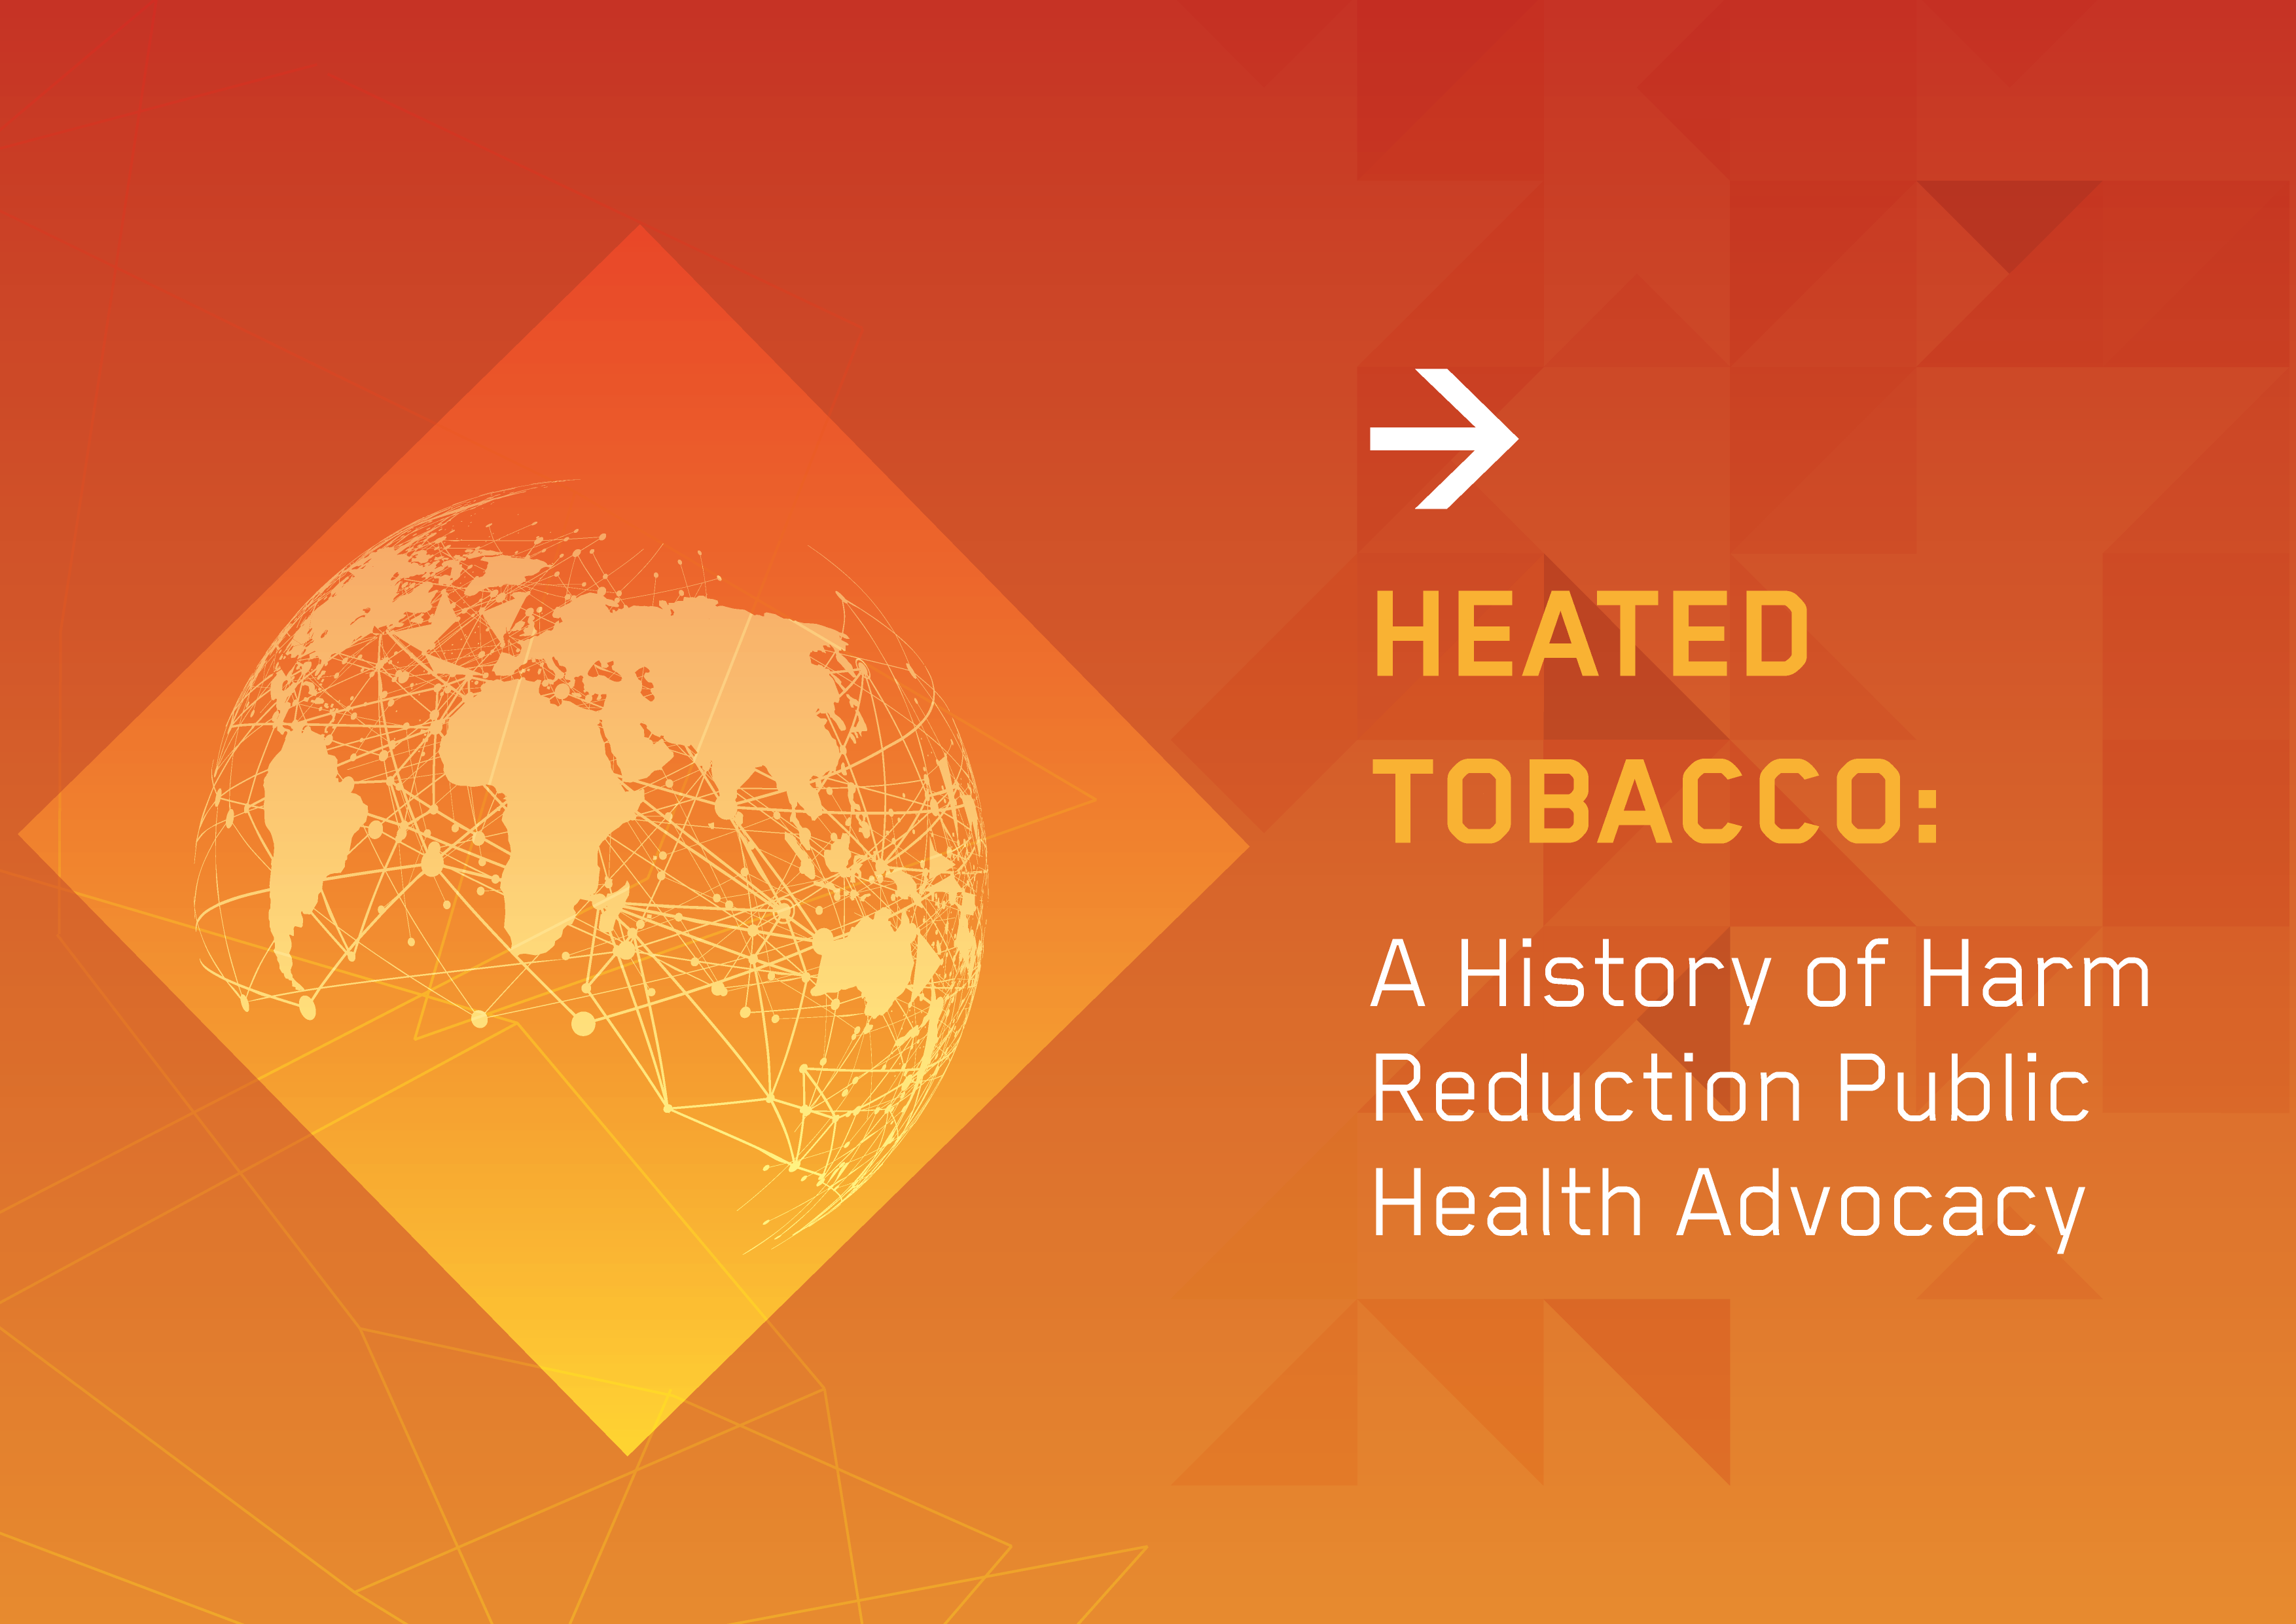 Heated Tobacco: A history of harm reduction public health advocacy